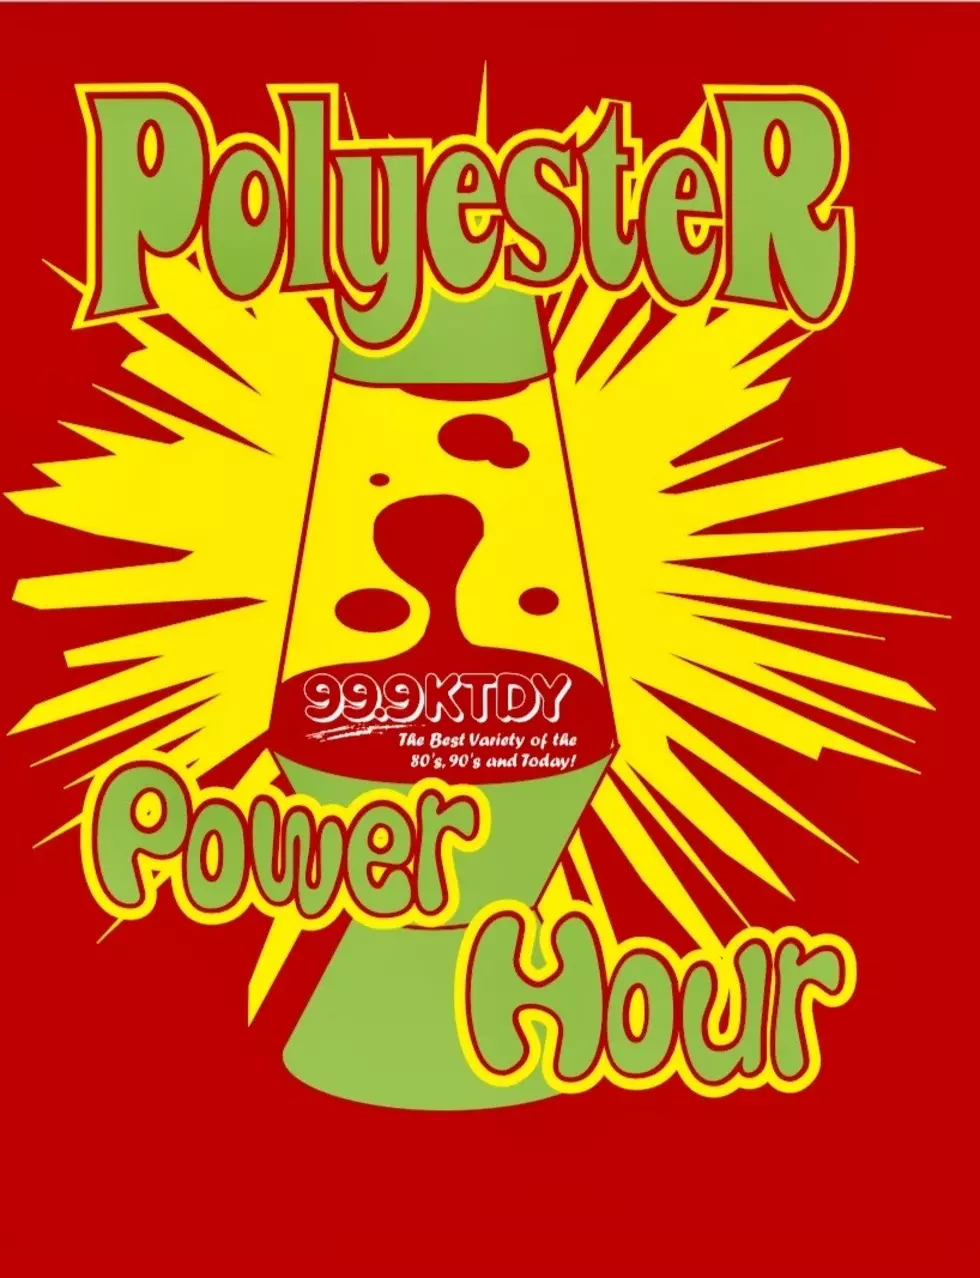 What If the Polyester Power Hour Went Away?